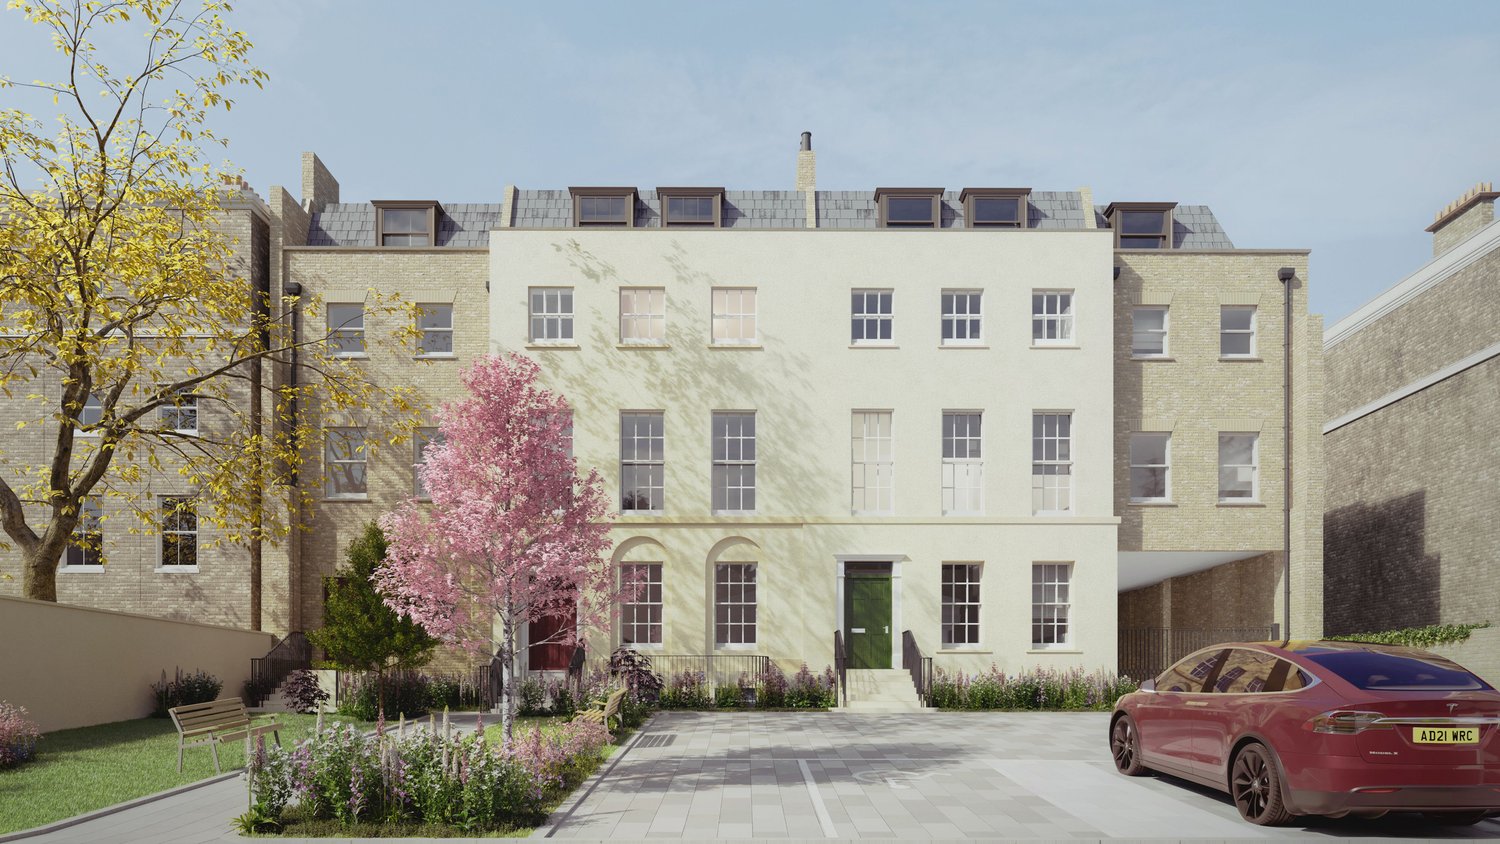 The Residence in Clapham - A sunny day with the property with a bright outdoor area directly outside